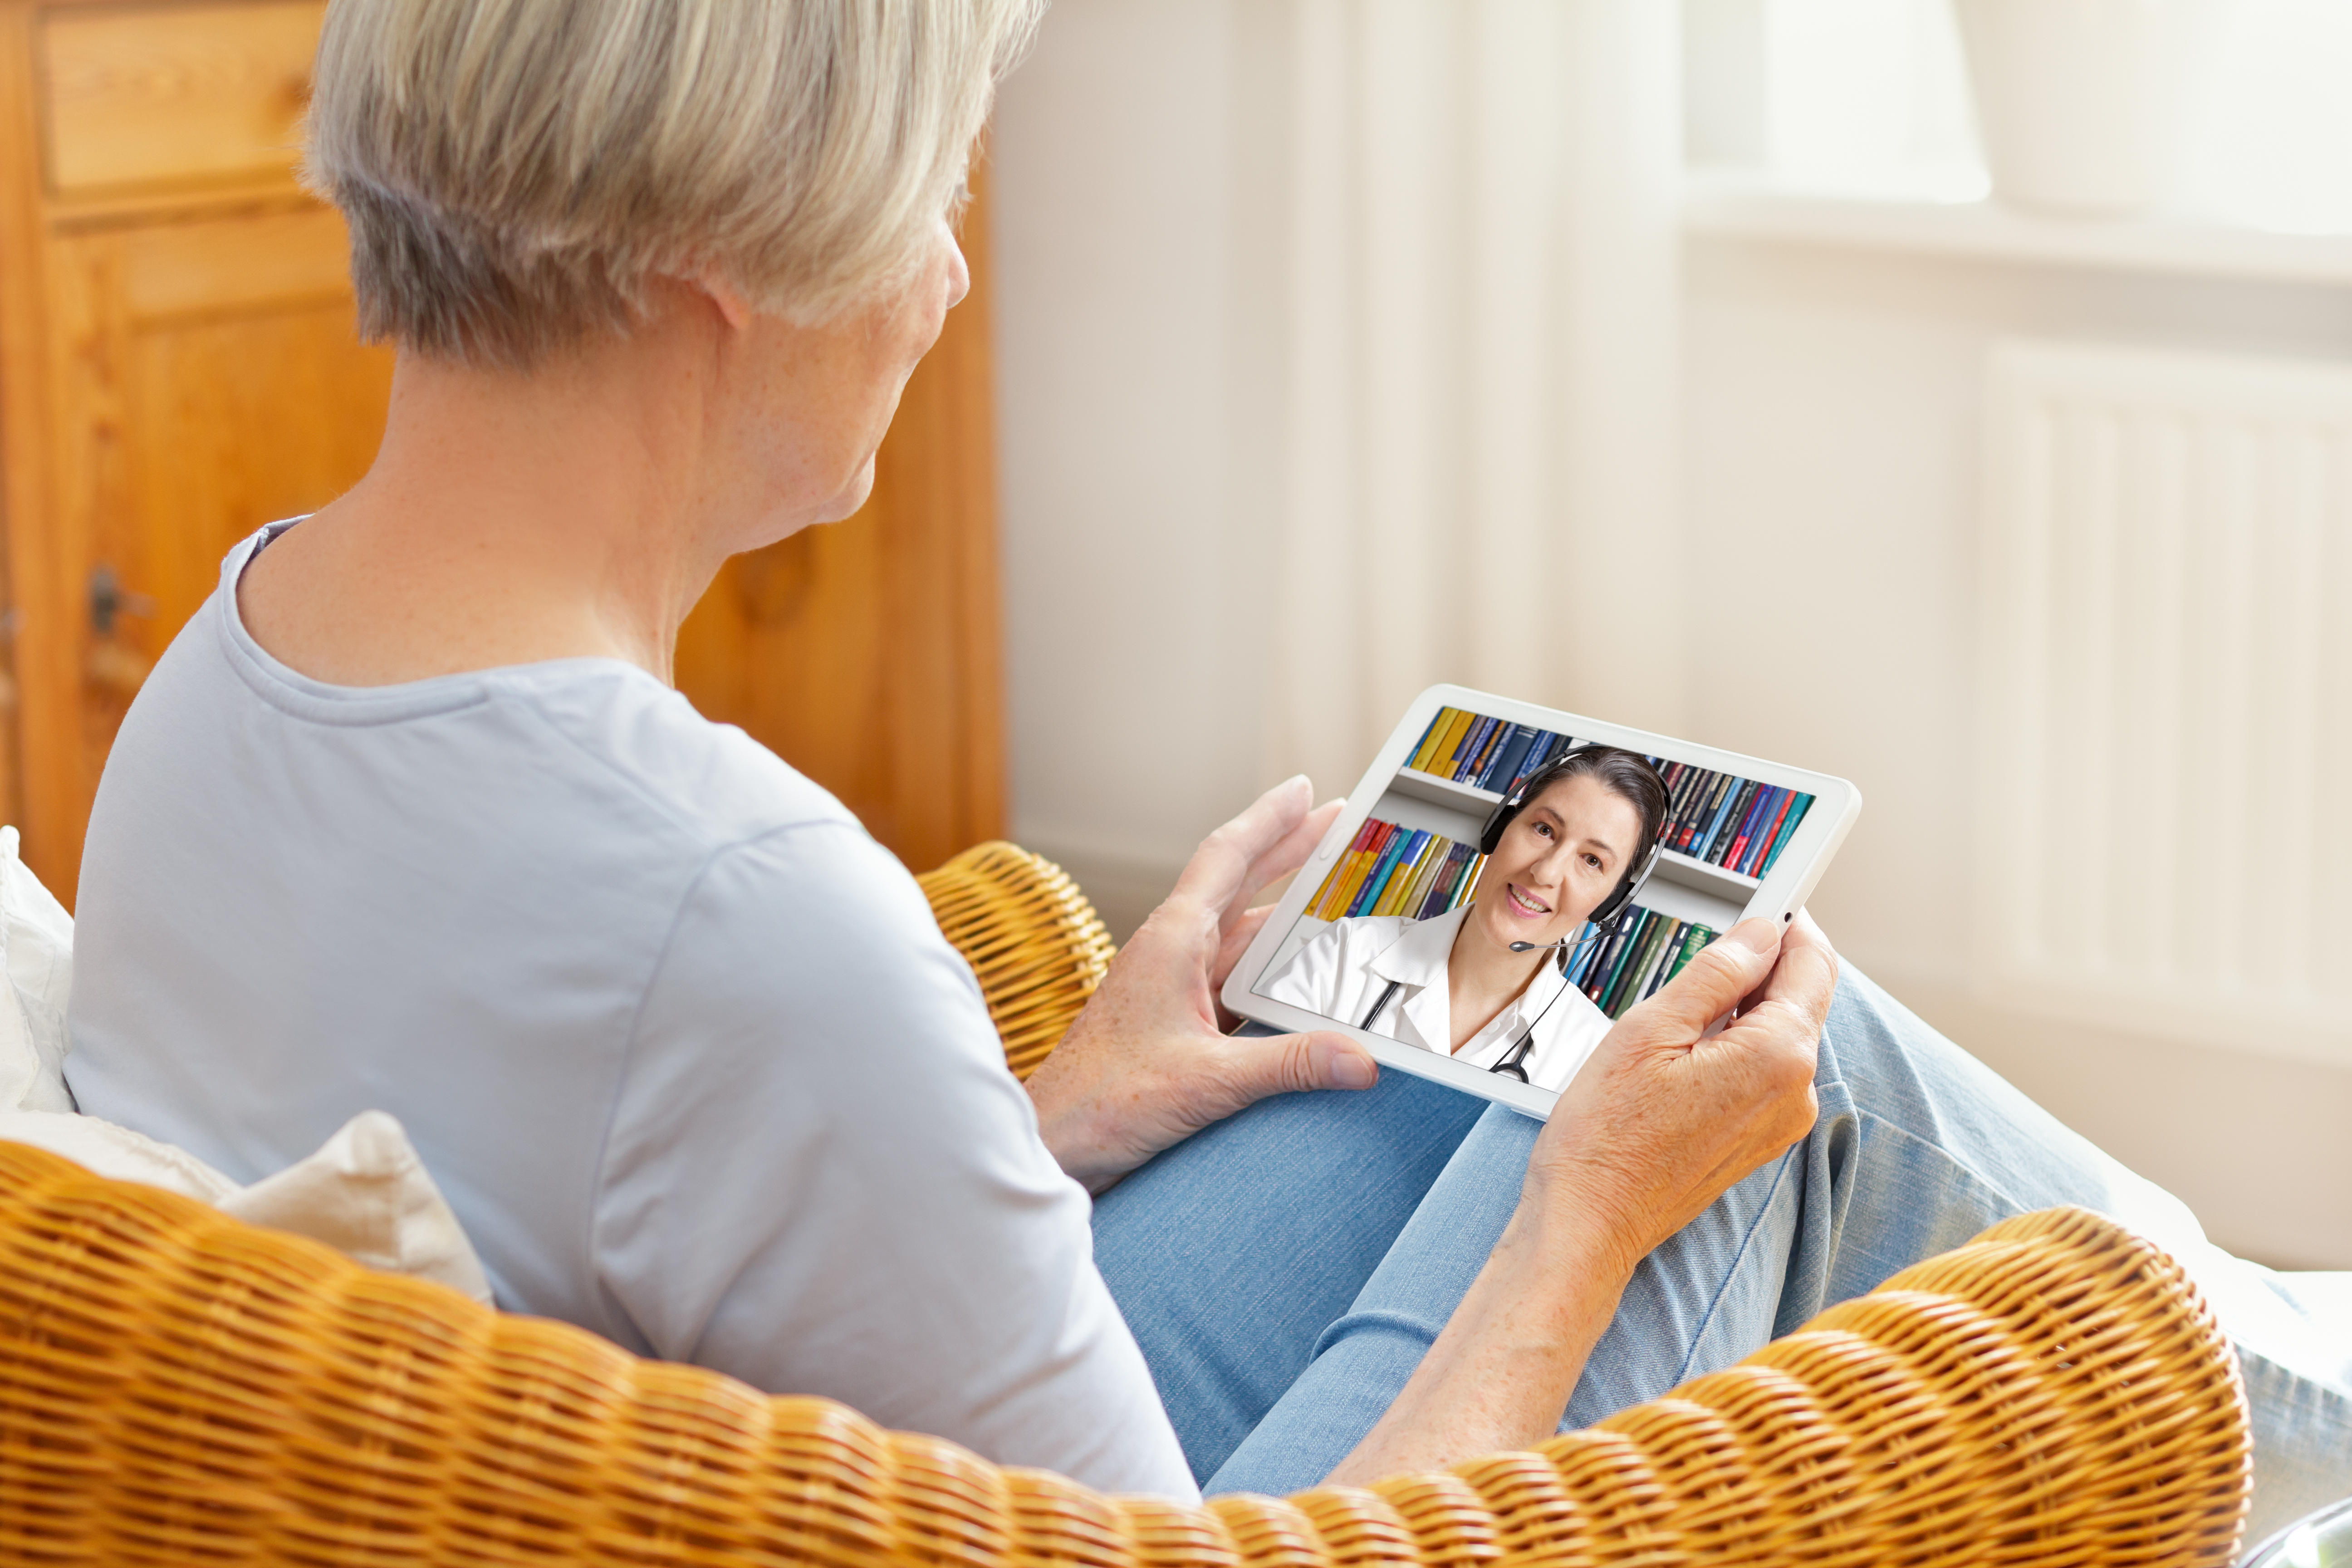 The telehealth functionality for mental health facility software brings patients and doctors closer.